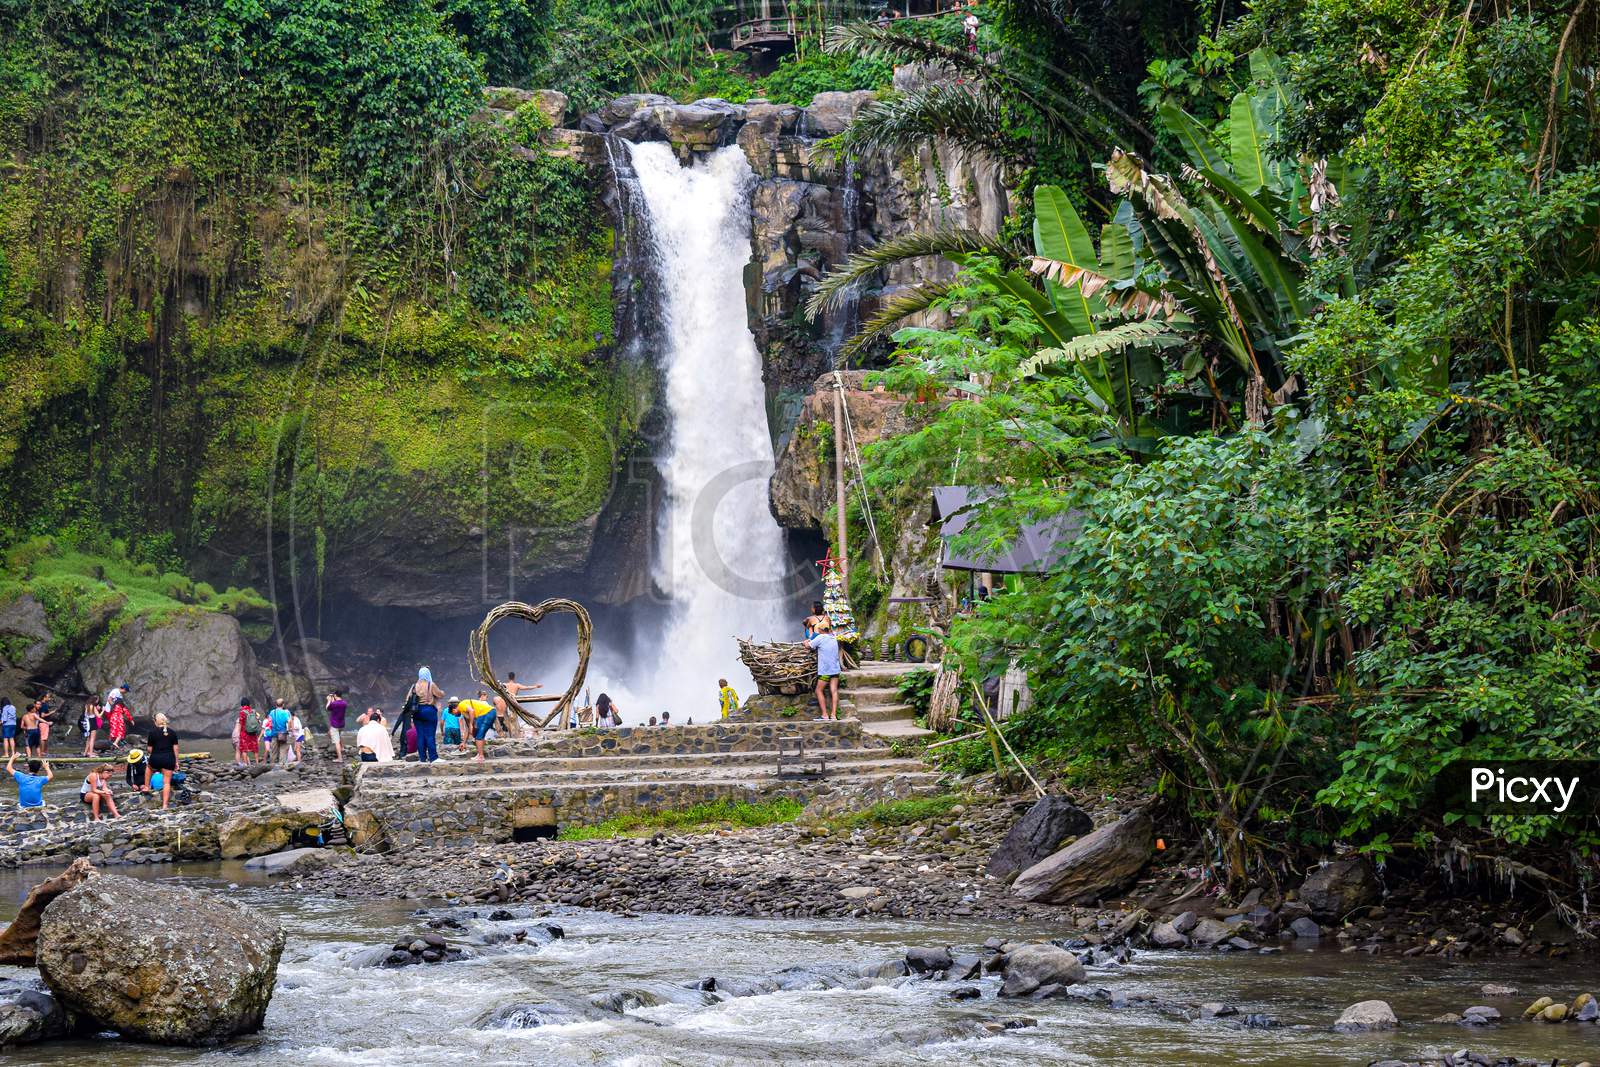 Tegenungan Waterfall is a beautiful waterfall located in plateau area and it is one of places of interest of Bali, Tegenungan waterfall in Bali, Indonesia